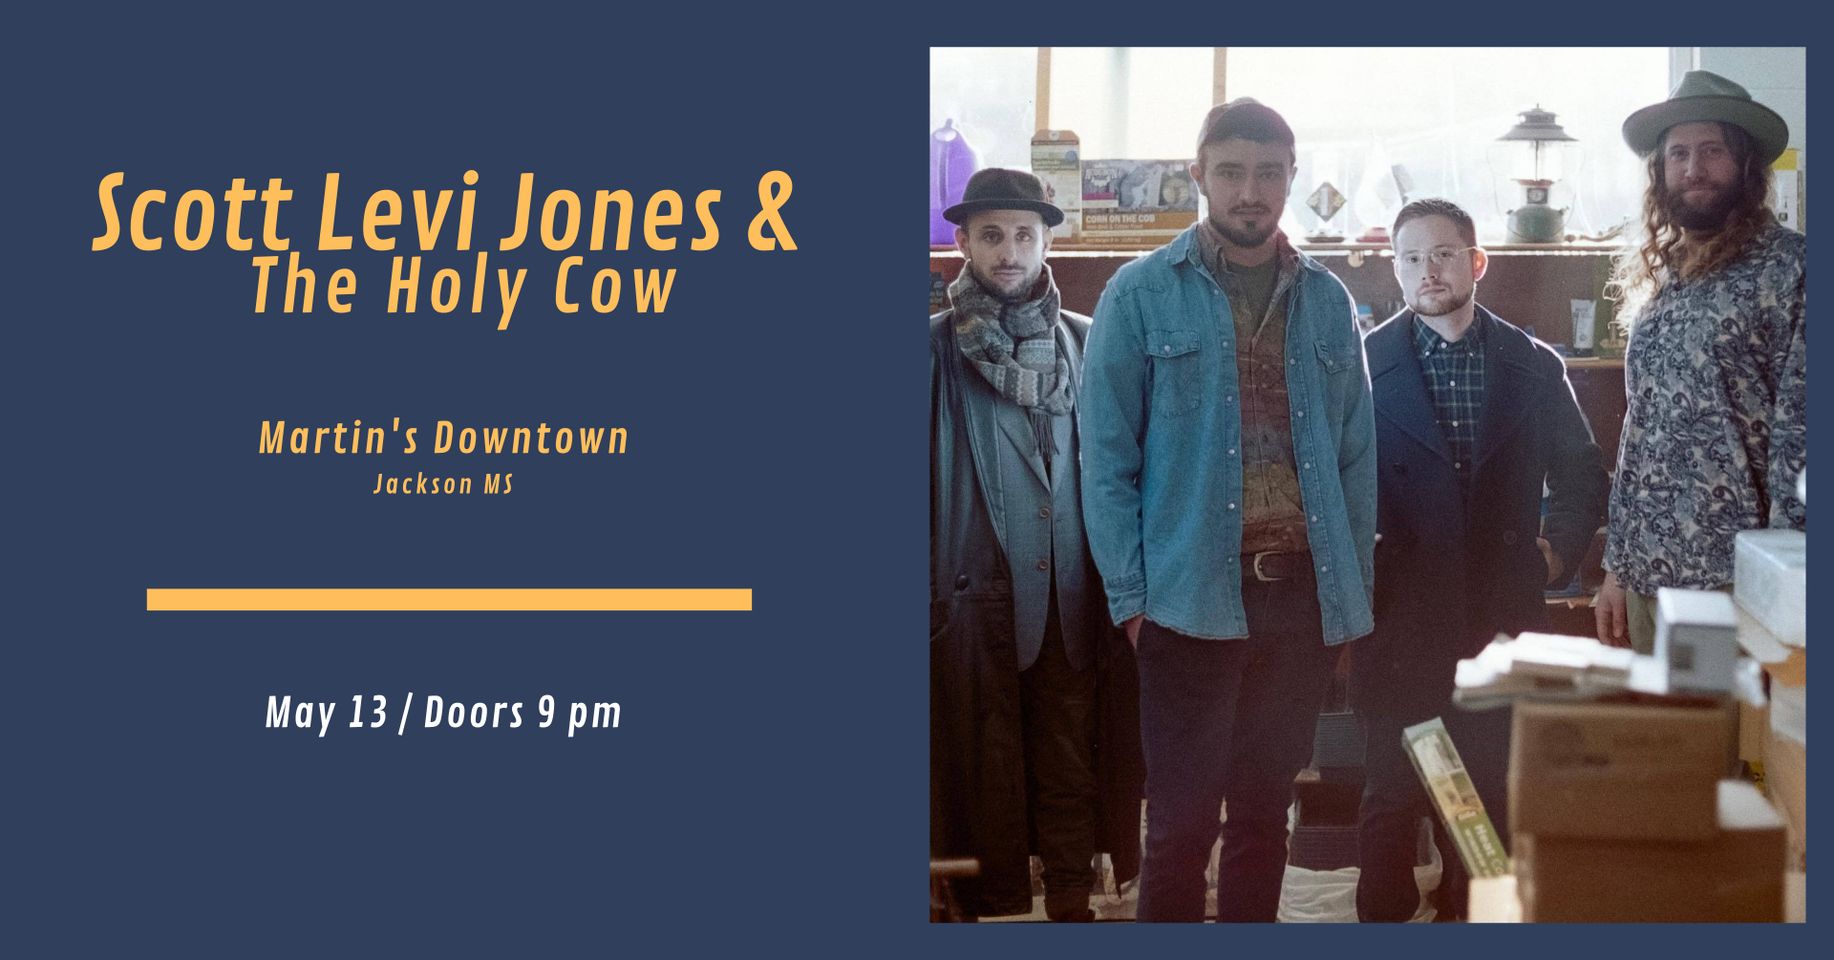 Scott Levi Jones & The Holy Cow Live at Martin’s Downtown